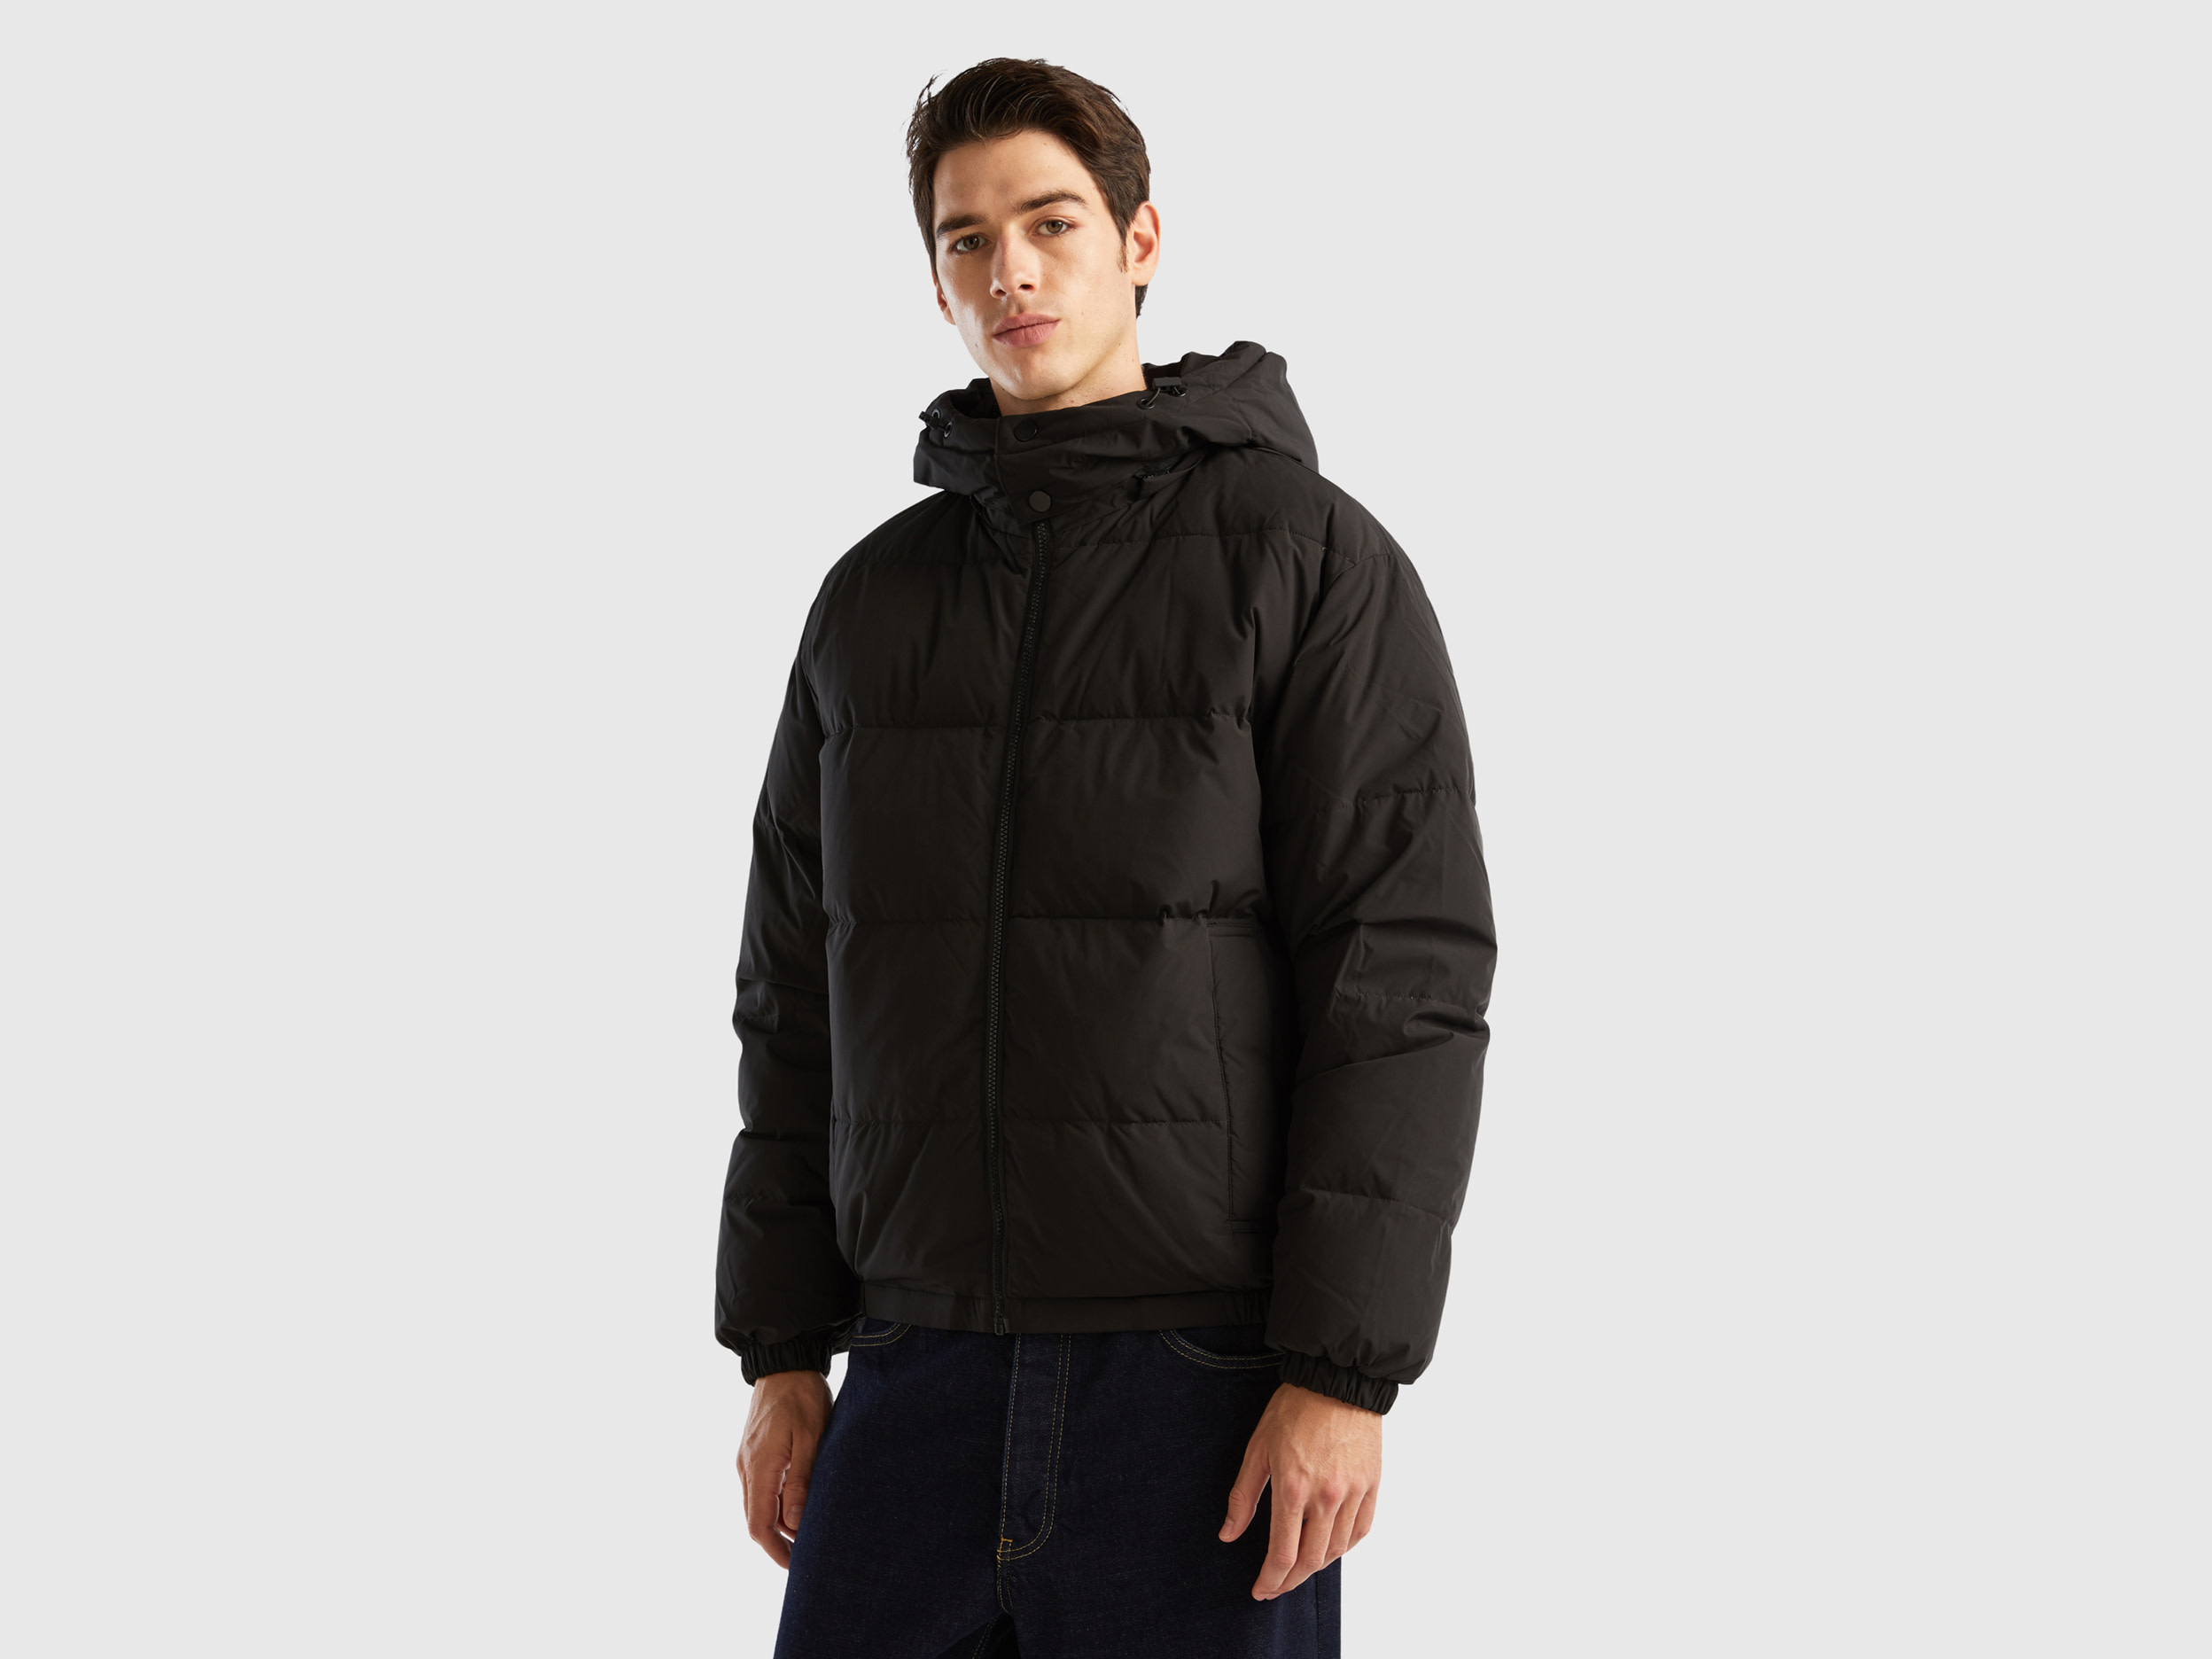 Benetton, Padded Jacket With Removable Hood, size L, Black, Men